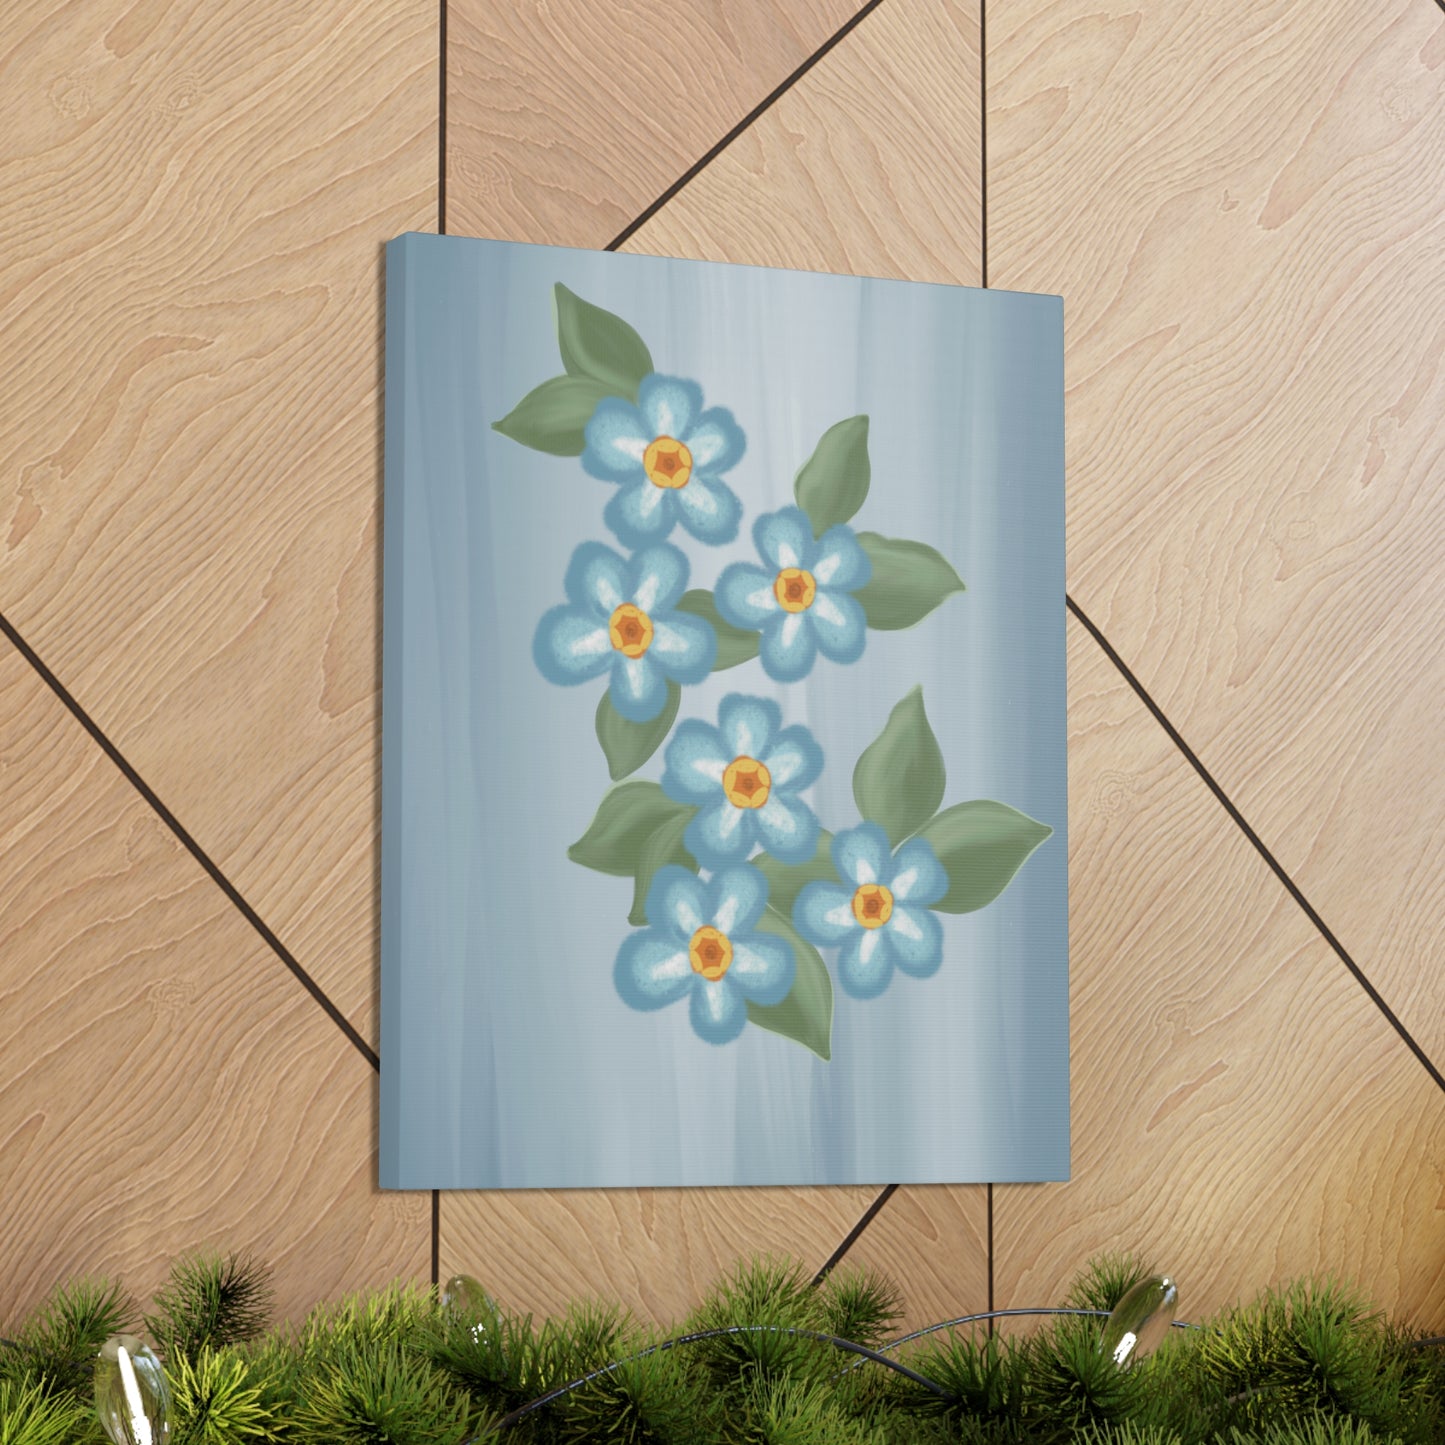 Forget Me Not Canvas Wall Art